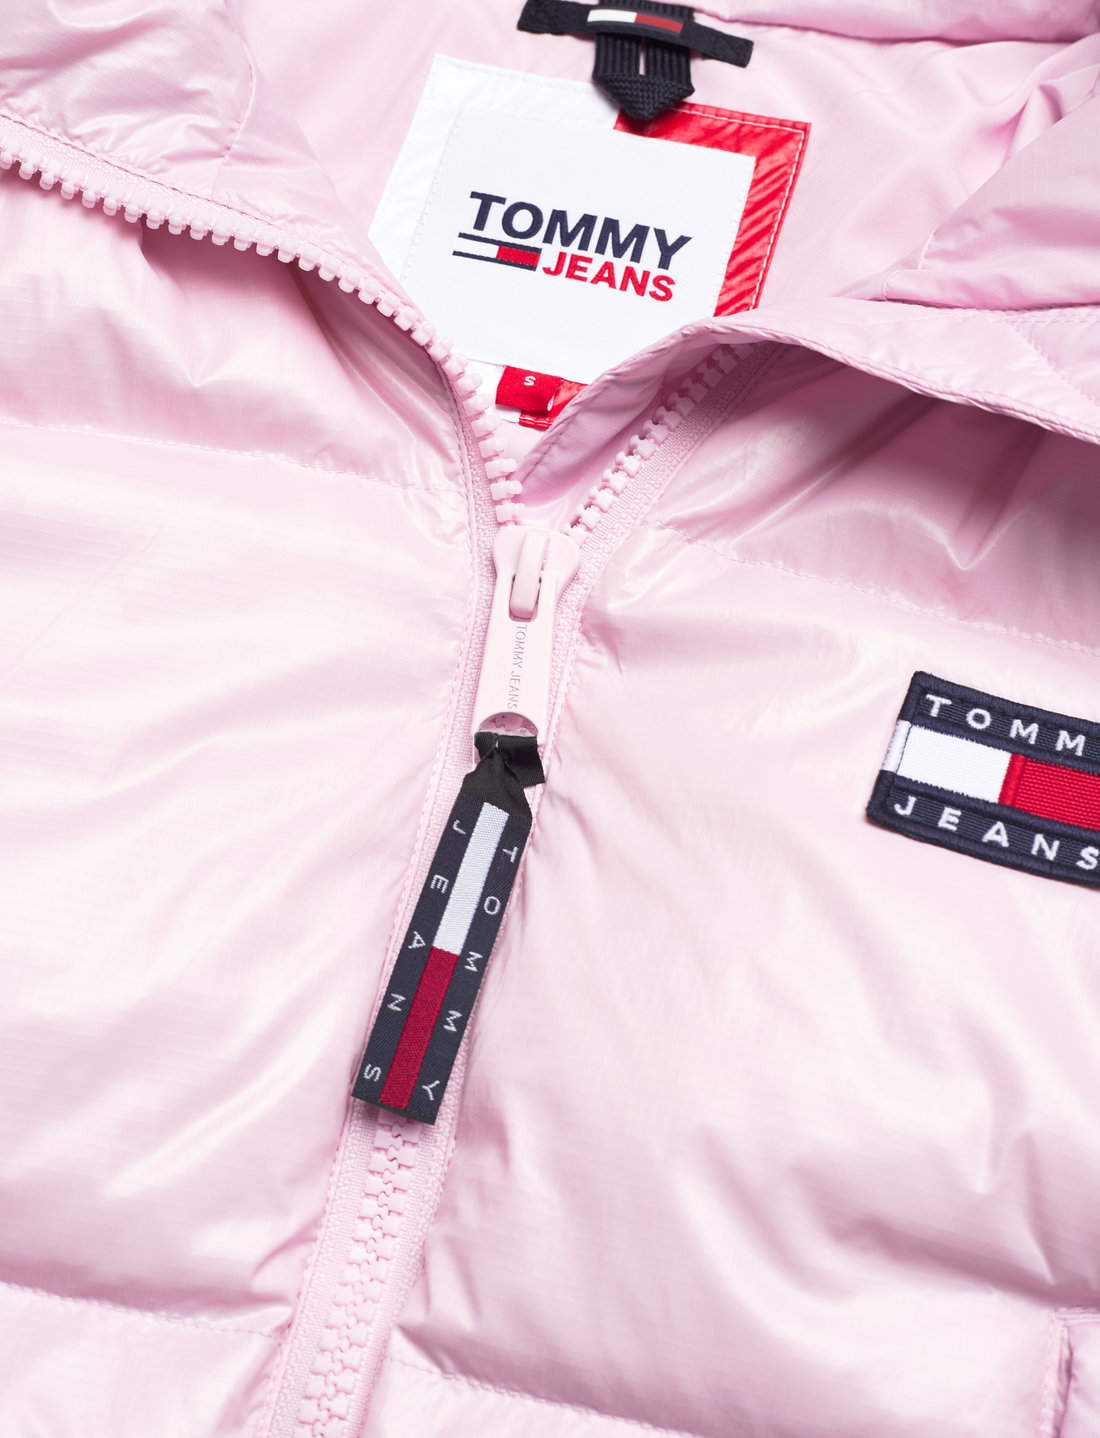 Tommy Jeans Tjw Crp Alaska Puffer - 126.45 €. Buy Down- & padded jackets  from Tommy Jeans online at Boozt.com. Fast delivery and easy returns